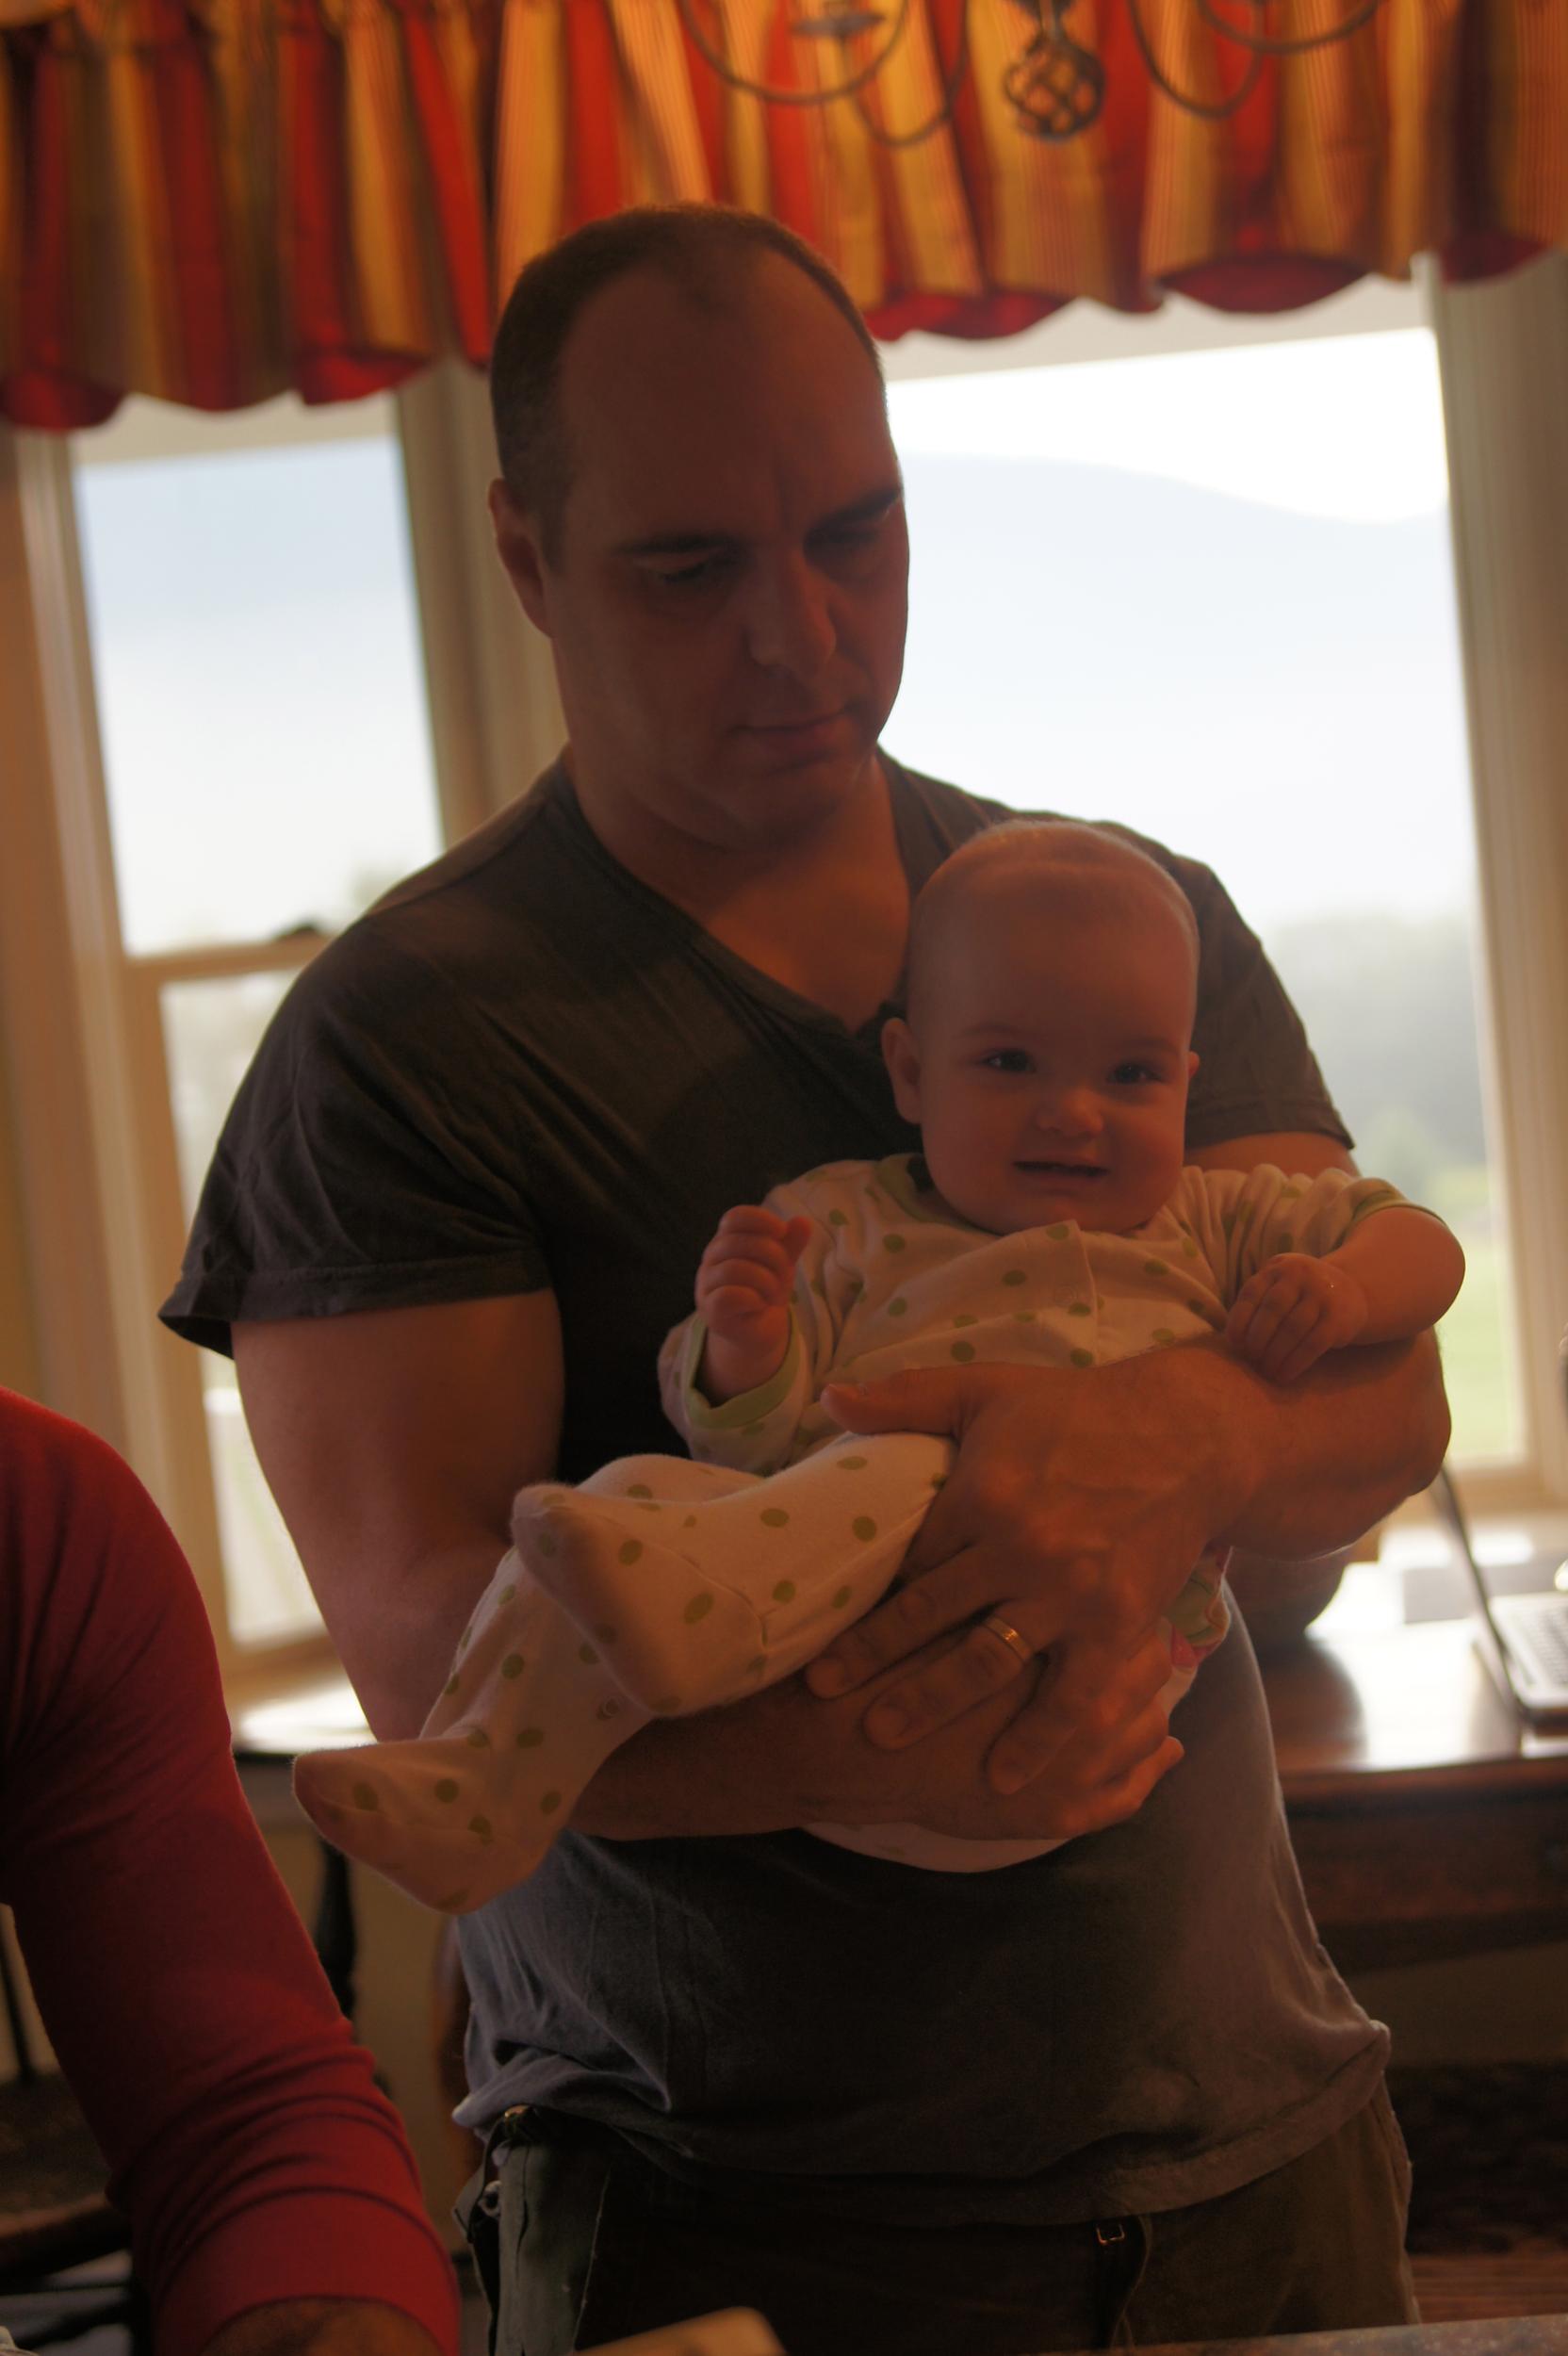 Uncle Chris must look enough like Dad to help her be comfortable.